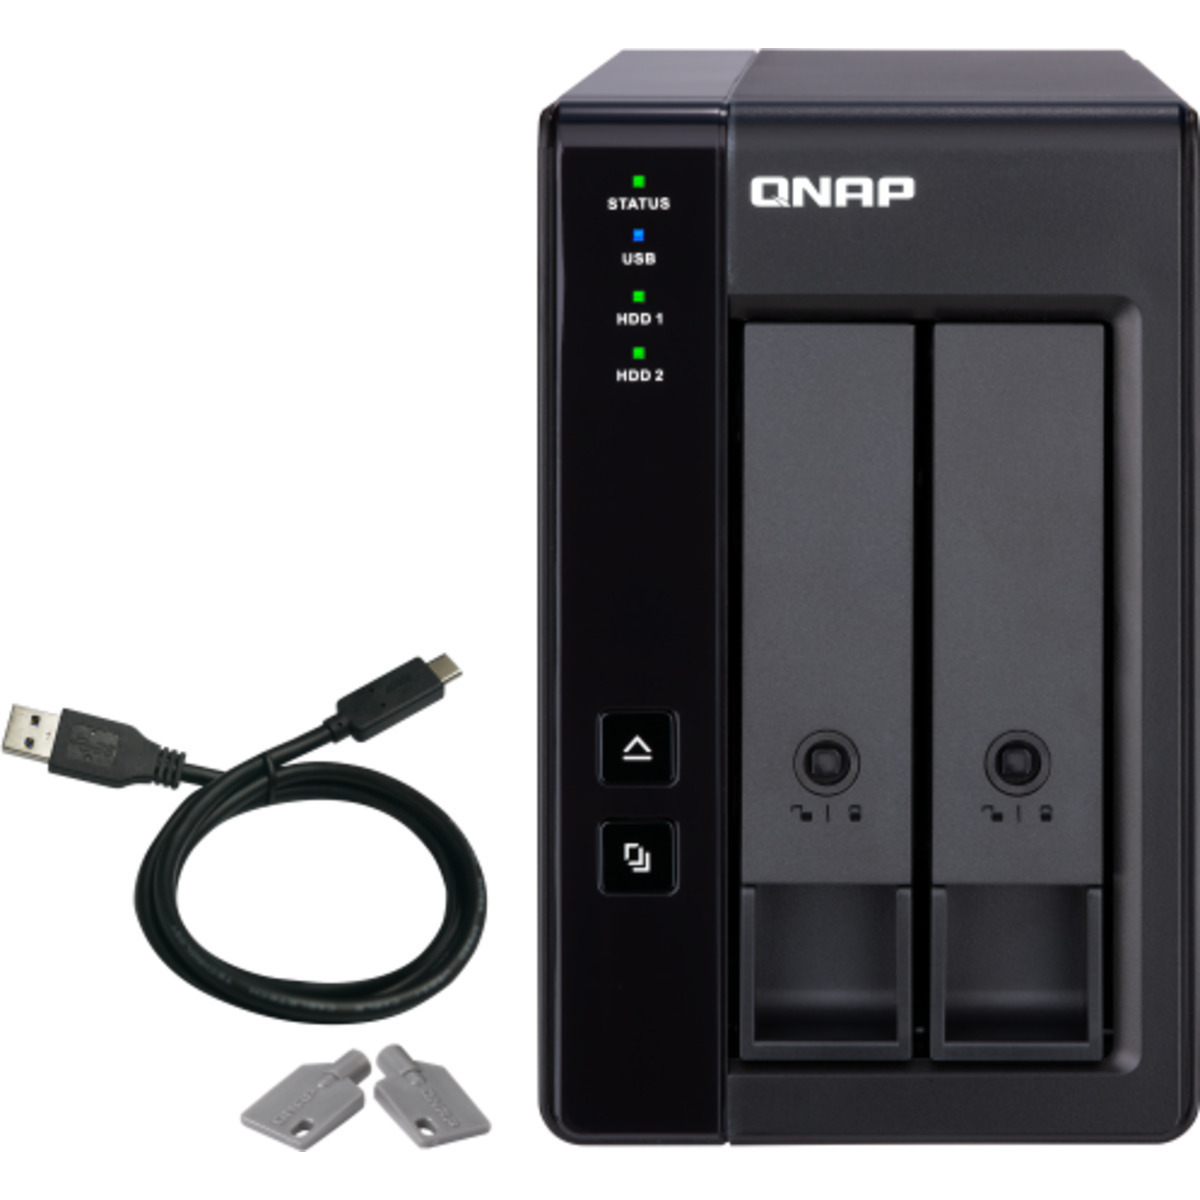 buy $1107 QNAP TR-002 External Expansion Drive 16tb Desktop Expansion Enclosure 2x8000gb Samsung 870 QVO MZ-77Q8T0 2.5 560/530MB/s SATA 6Gb/s SSD CONSUMER Class Drives Installed - Burn-In Tested - ON SALE - nas headquarters buy network attached storage server device das new raid-5 free shipping simply usa TR-002 External Expansion Drive